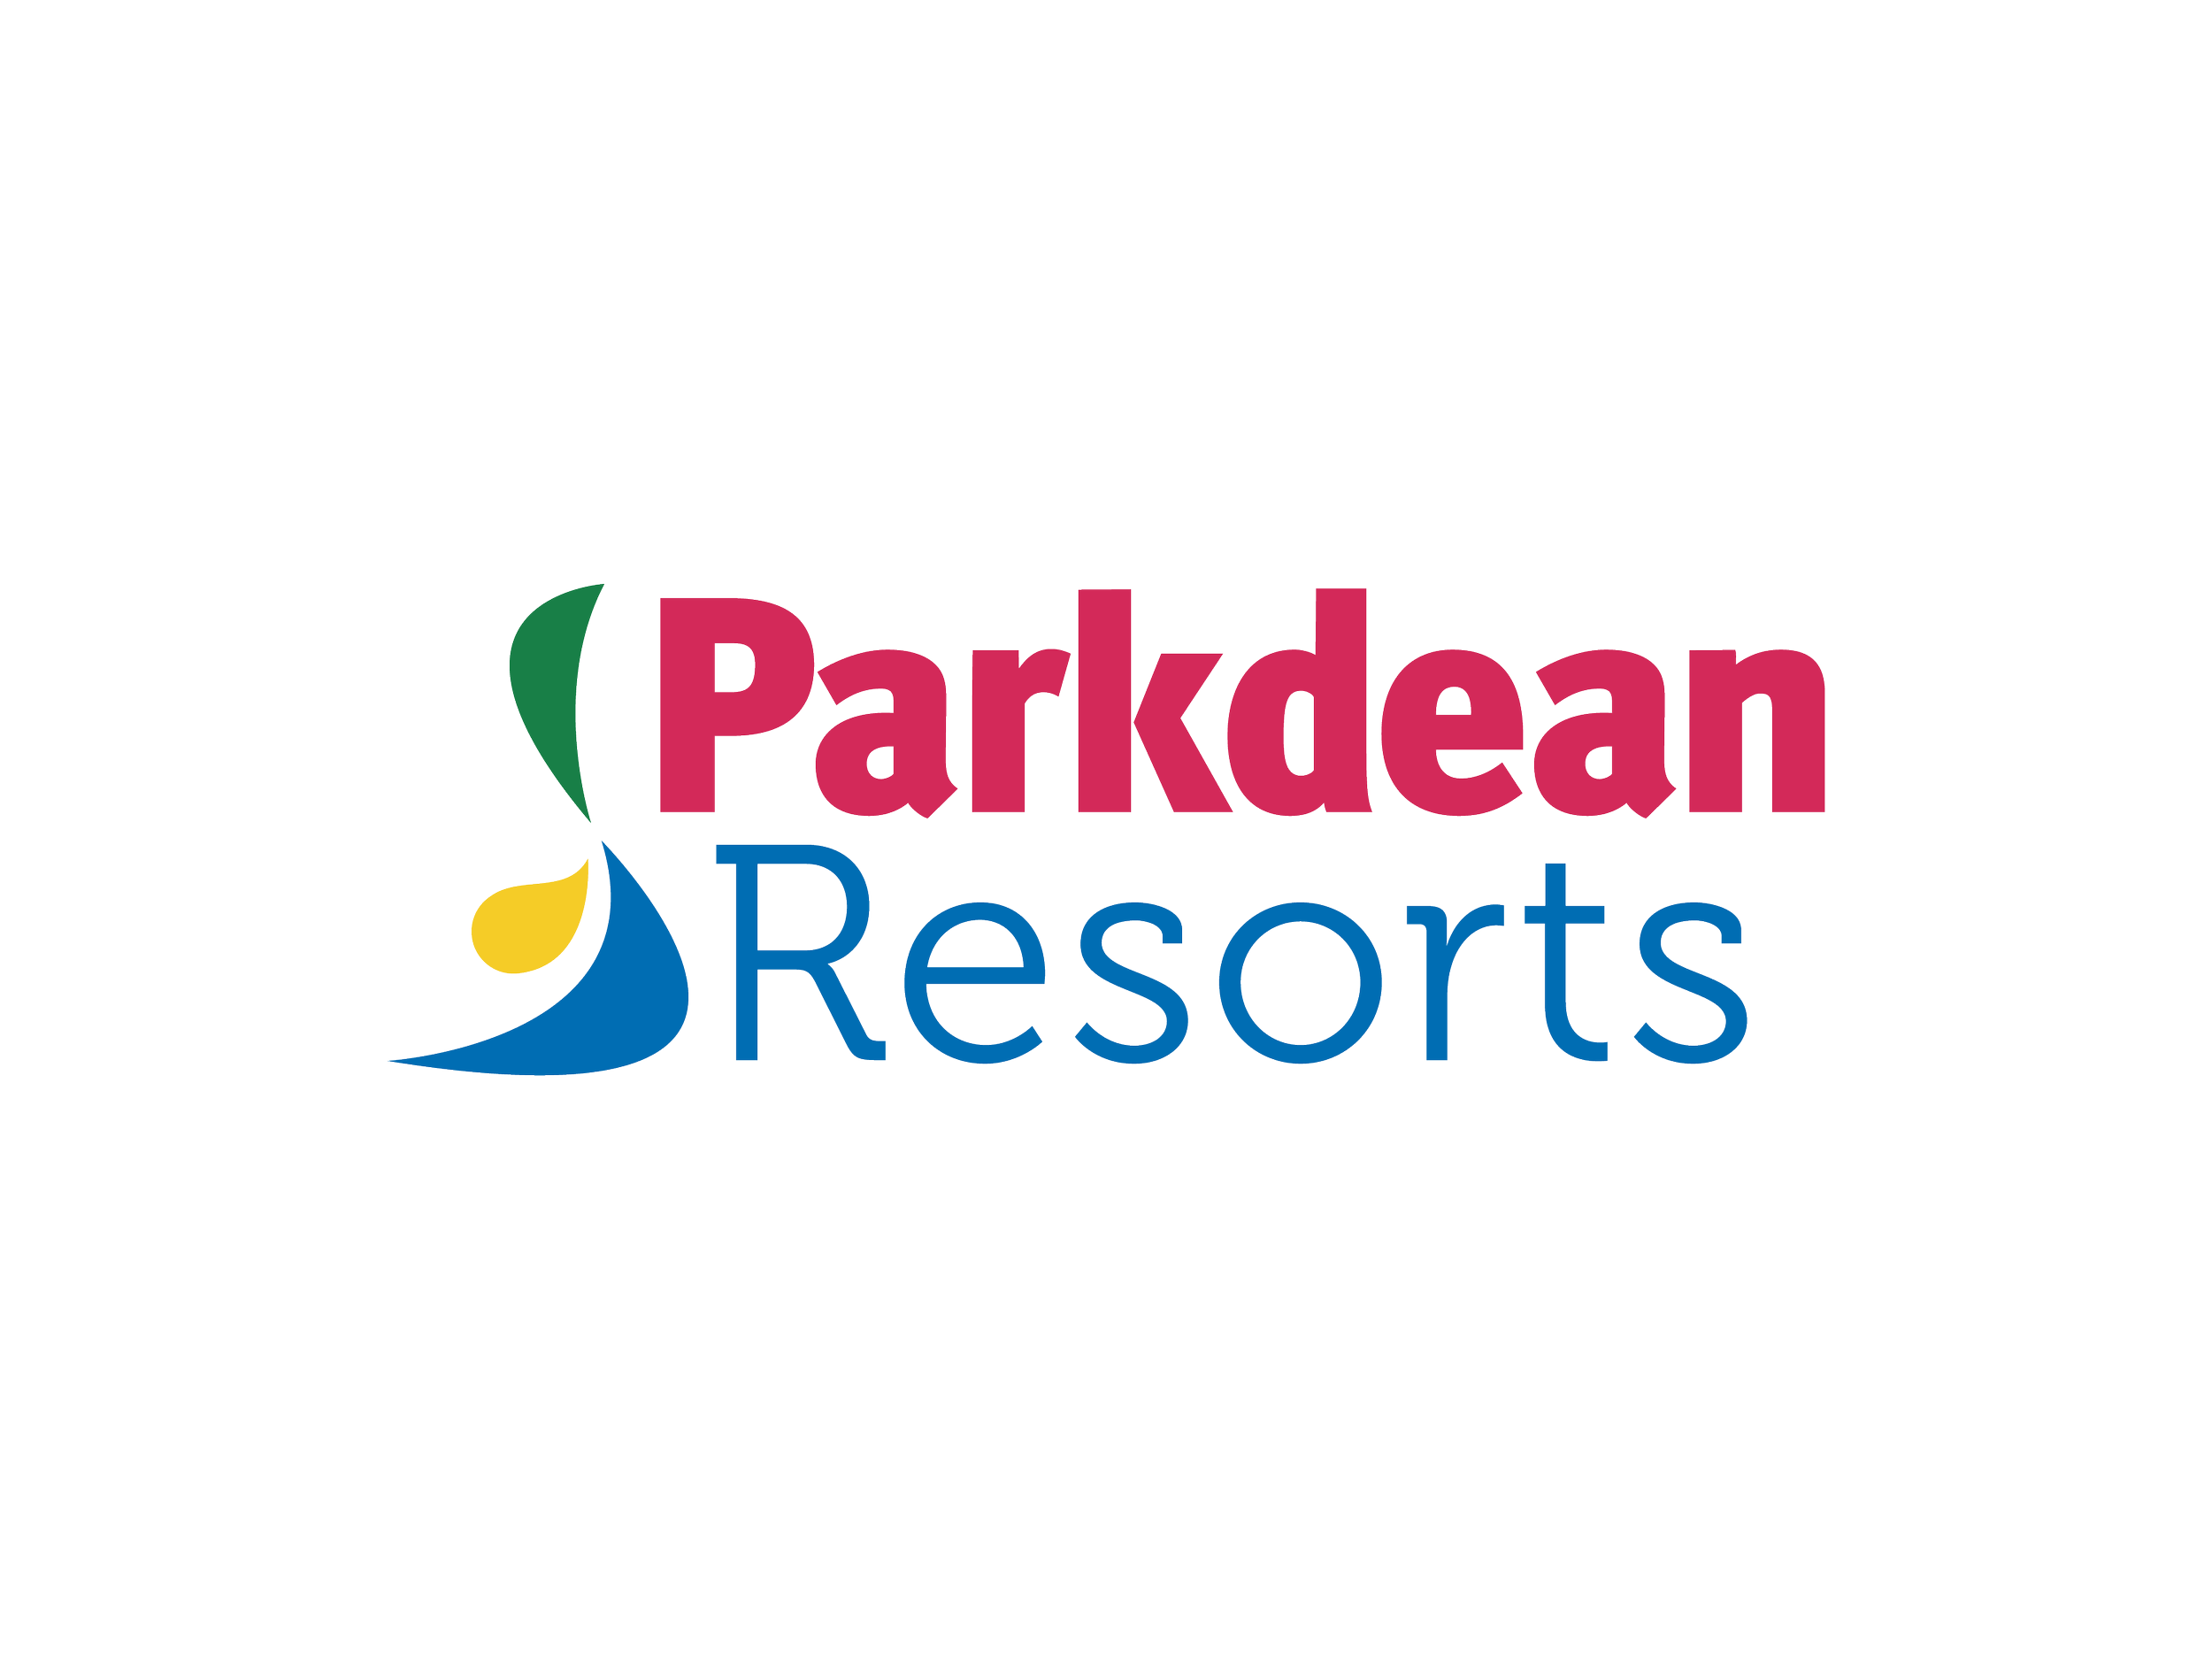 PURE_ClientLogo_ParkdeanResorts.png